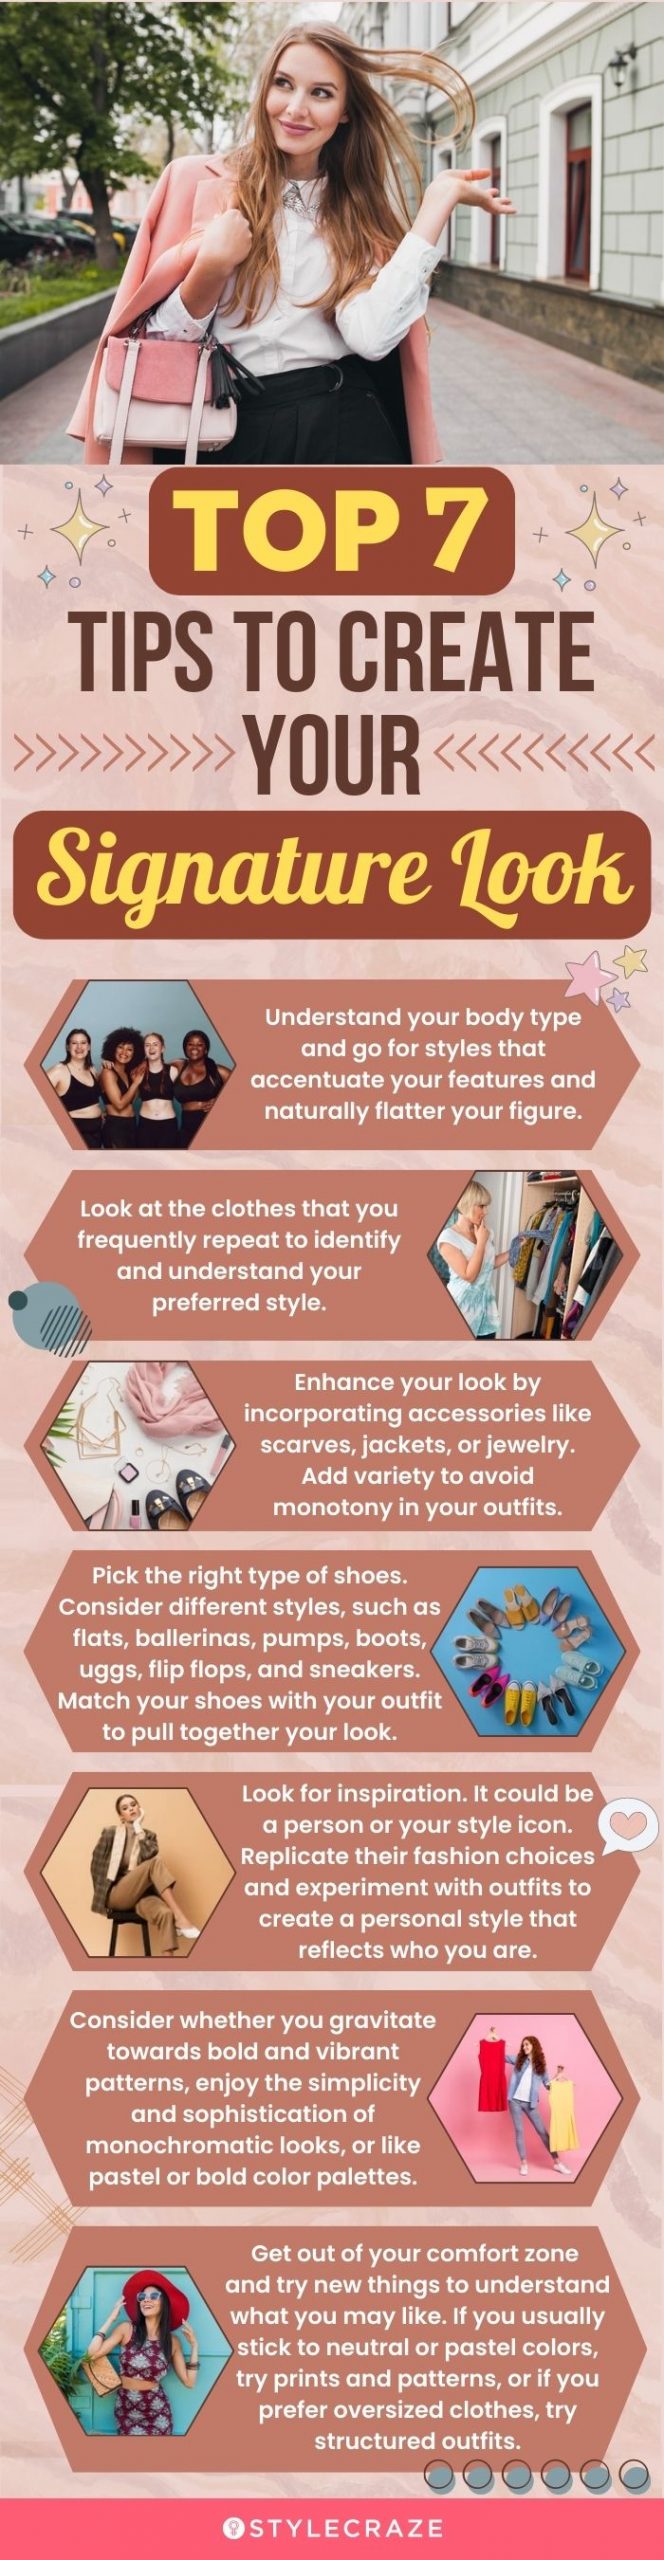 top 7 tips to create your signature look(infographic)